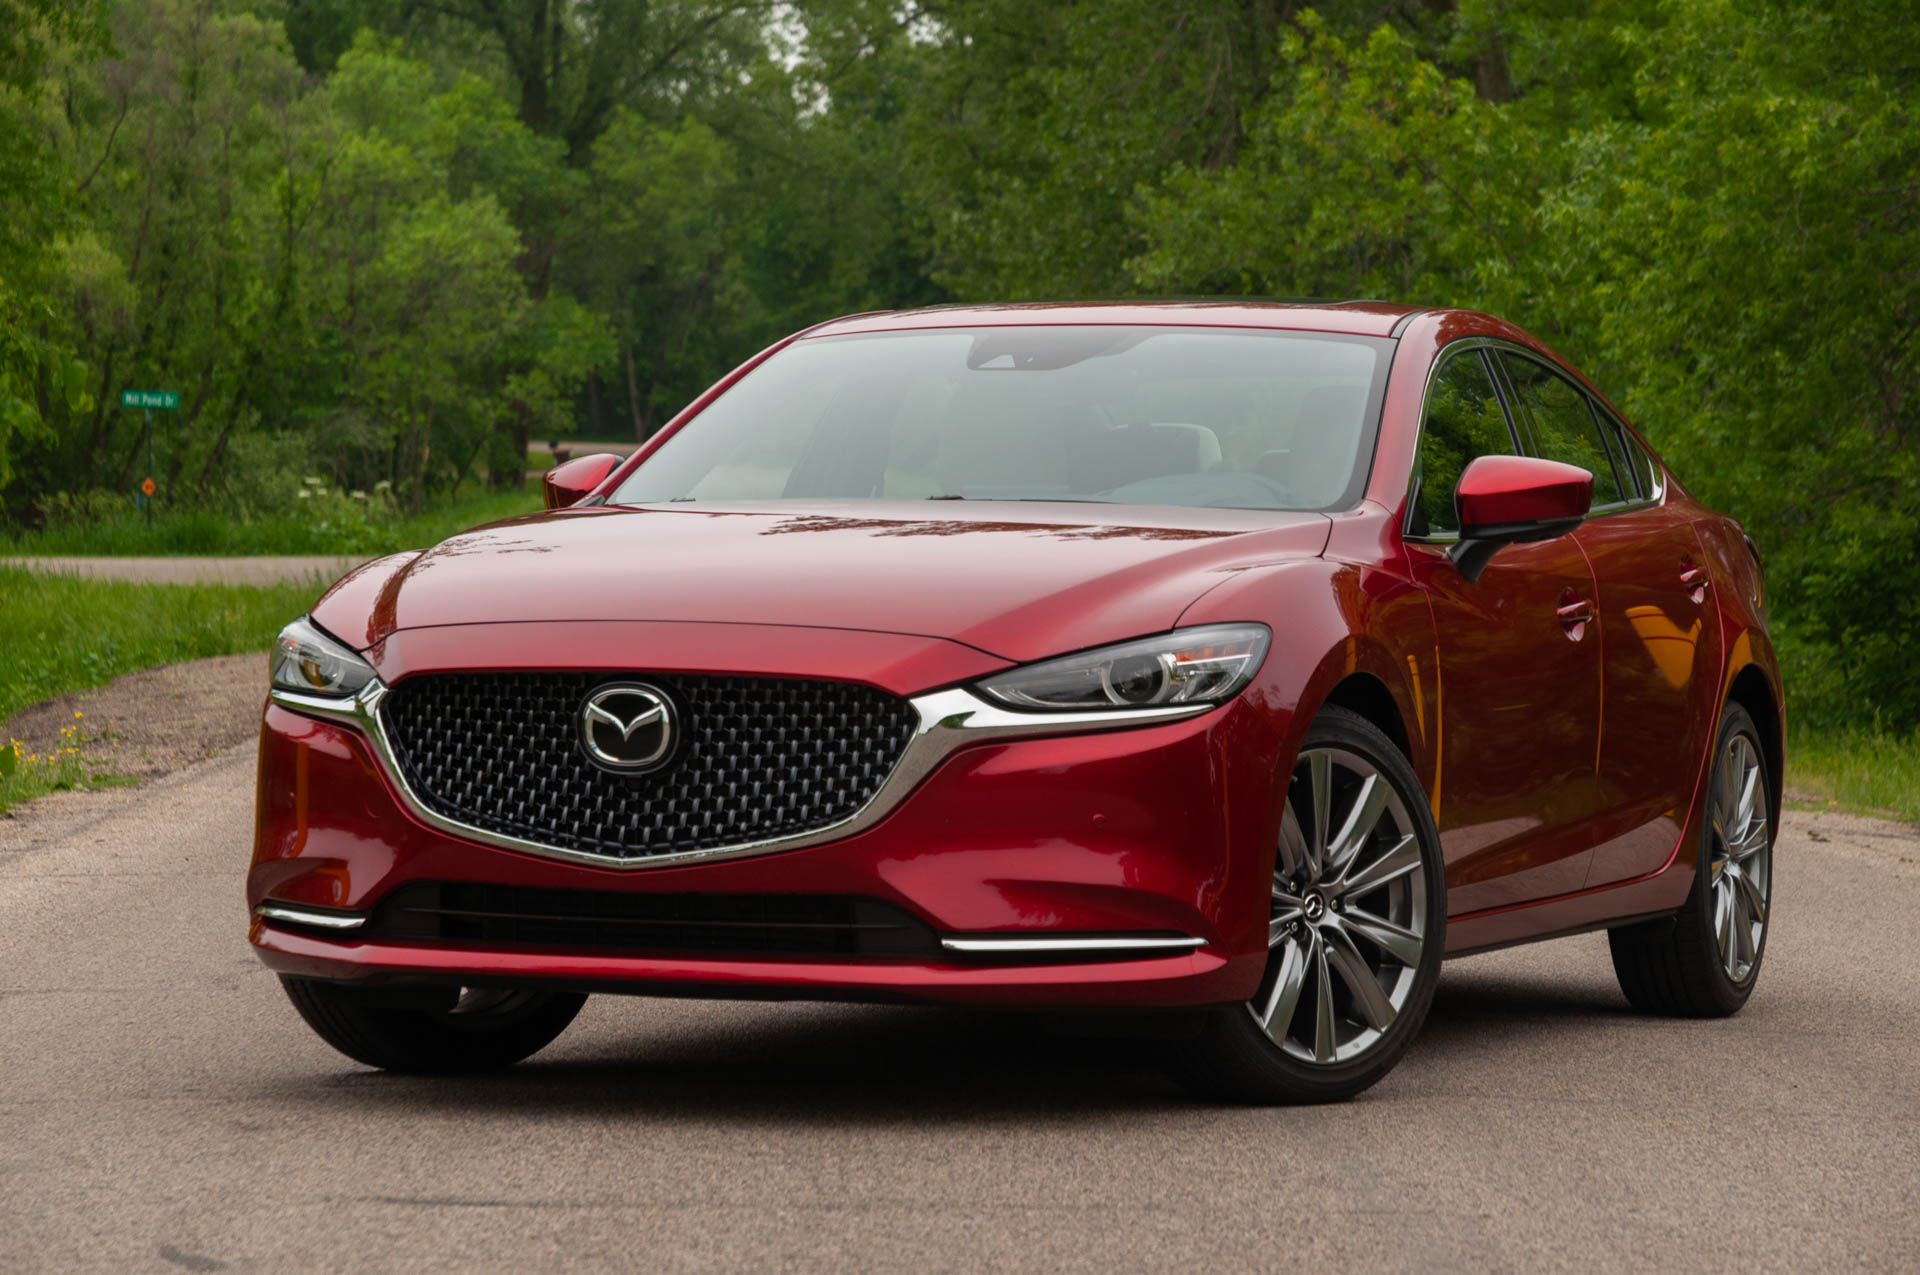 Review update: The 2020 Mazda 6 Signature straddles the divide between  mainstream and premium